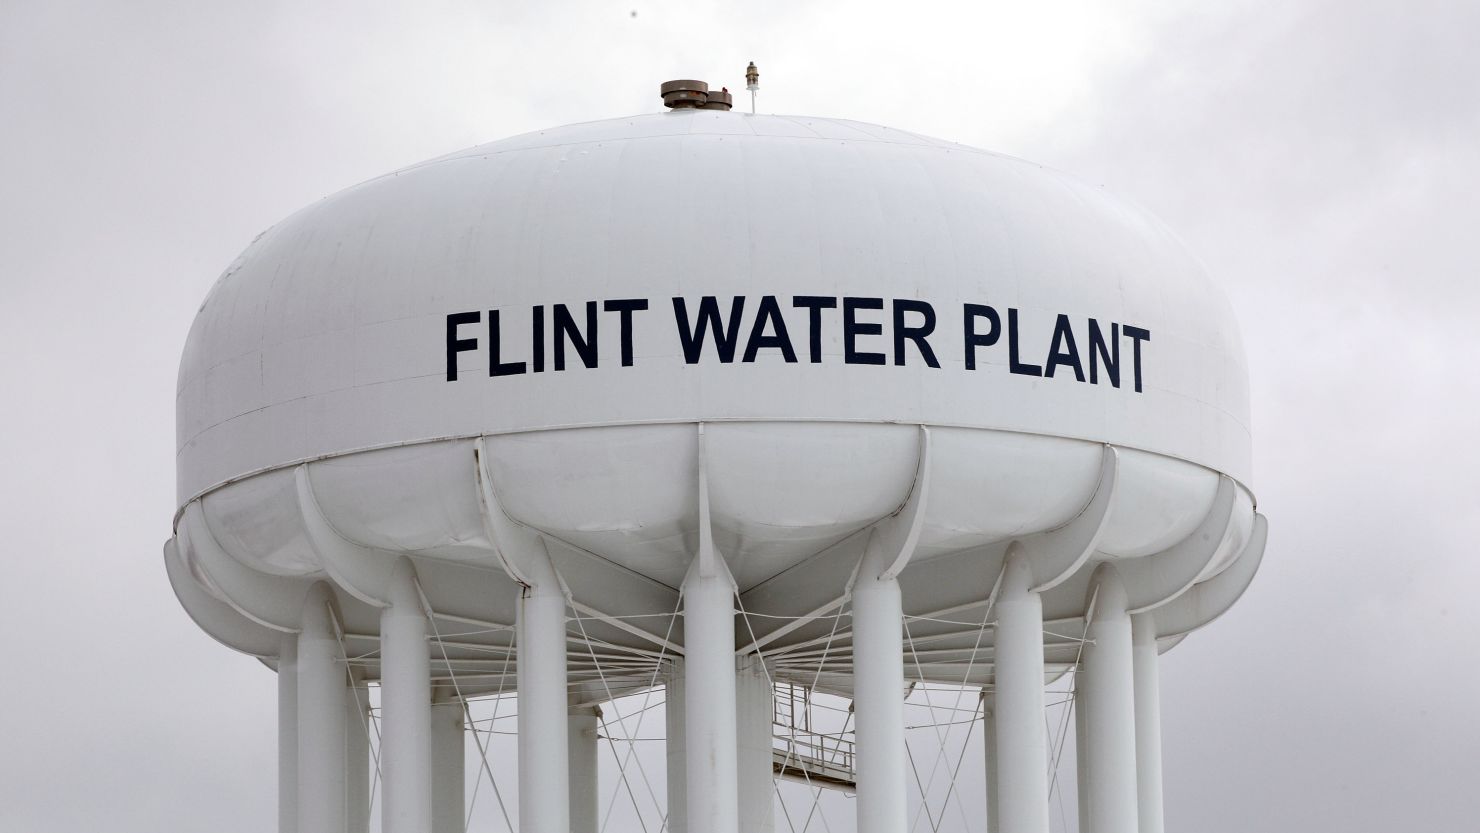 After two years of crisis over Flint's water supply, a judge has ruled that providing bottled water and water filters at distribution points is not enough.